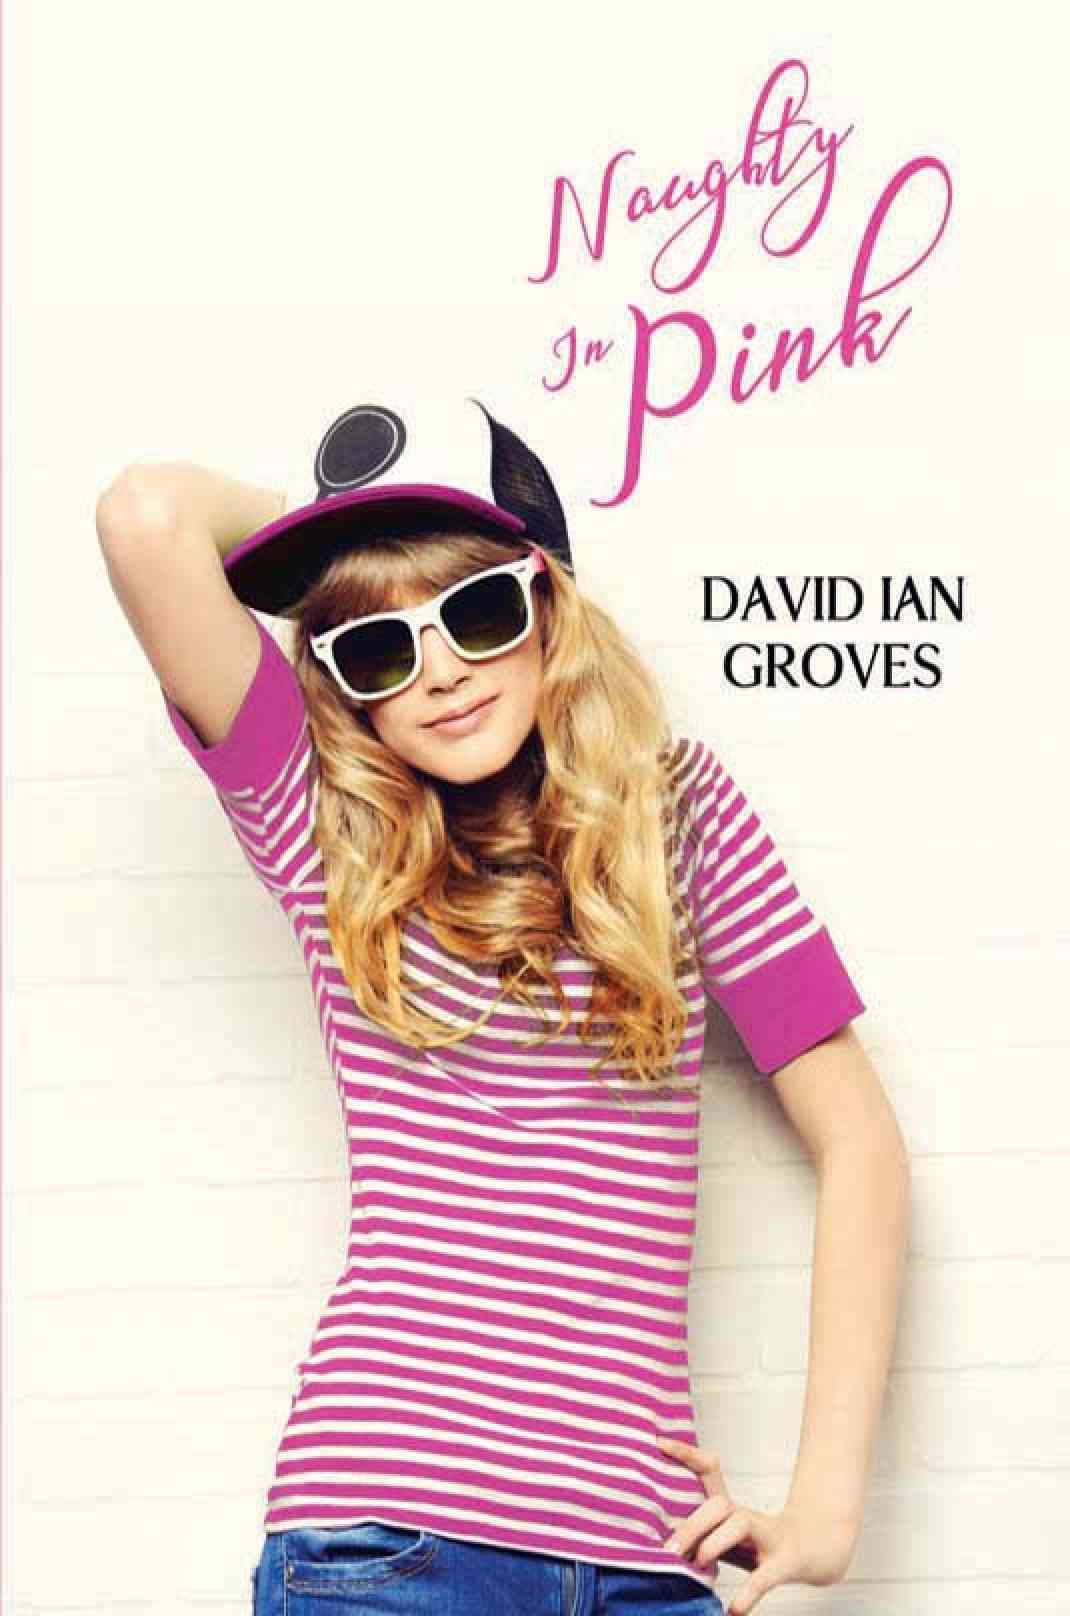 Teenage Fiction Novel Naughty in Pink by David Ian was featured on Bookbuzz.net